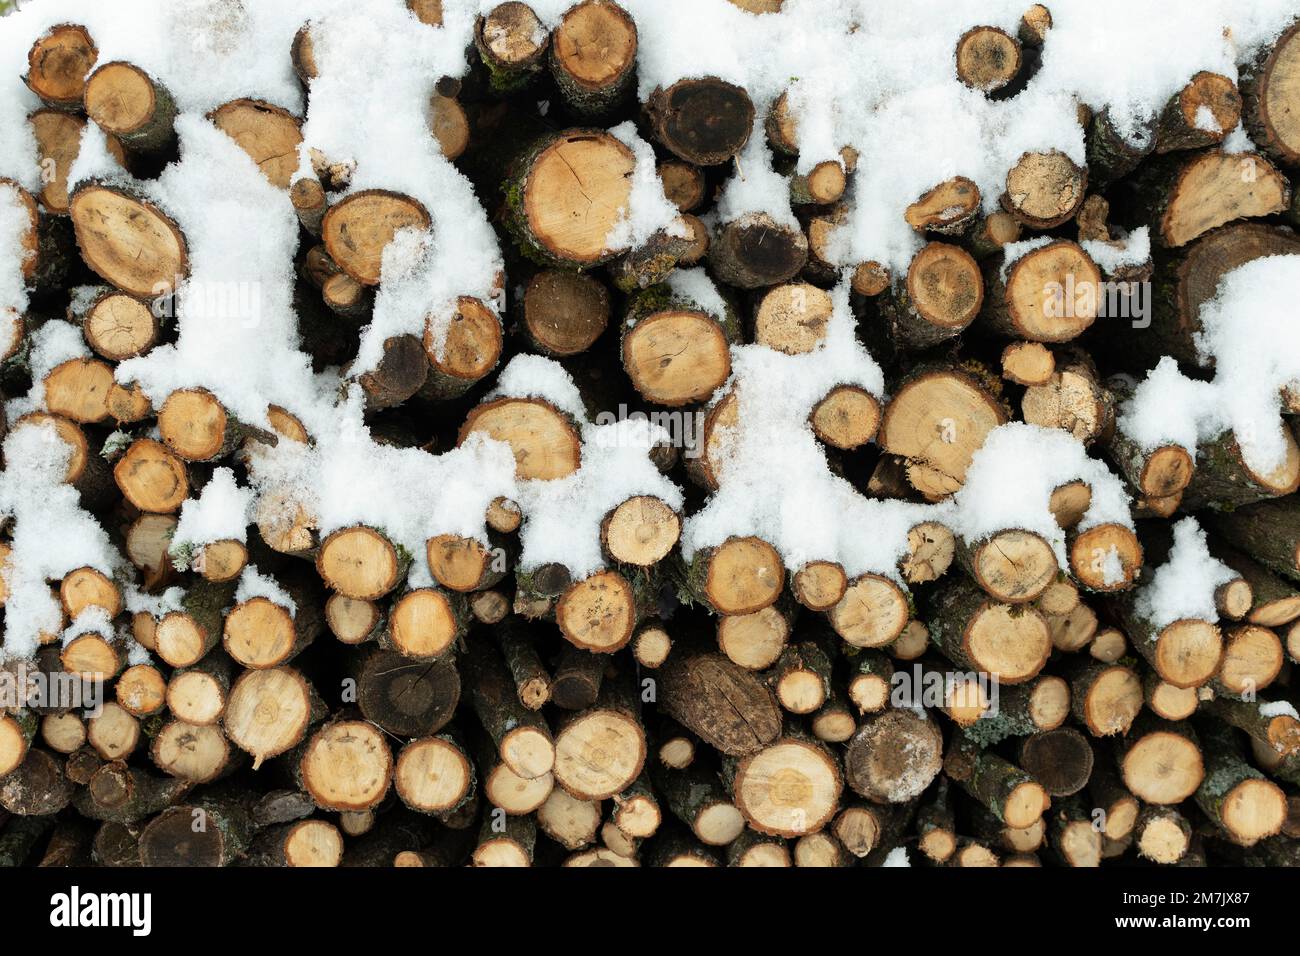 Cut down wood trunks covered with snow stacked on each other in the forest Stock Photo